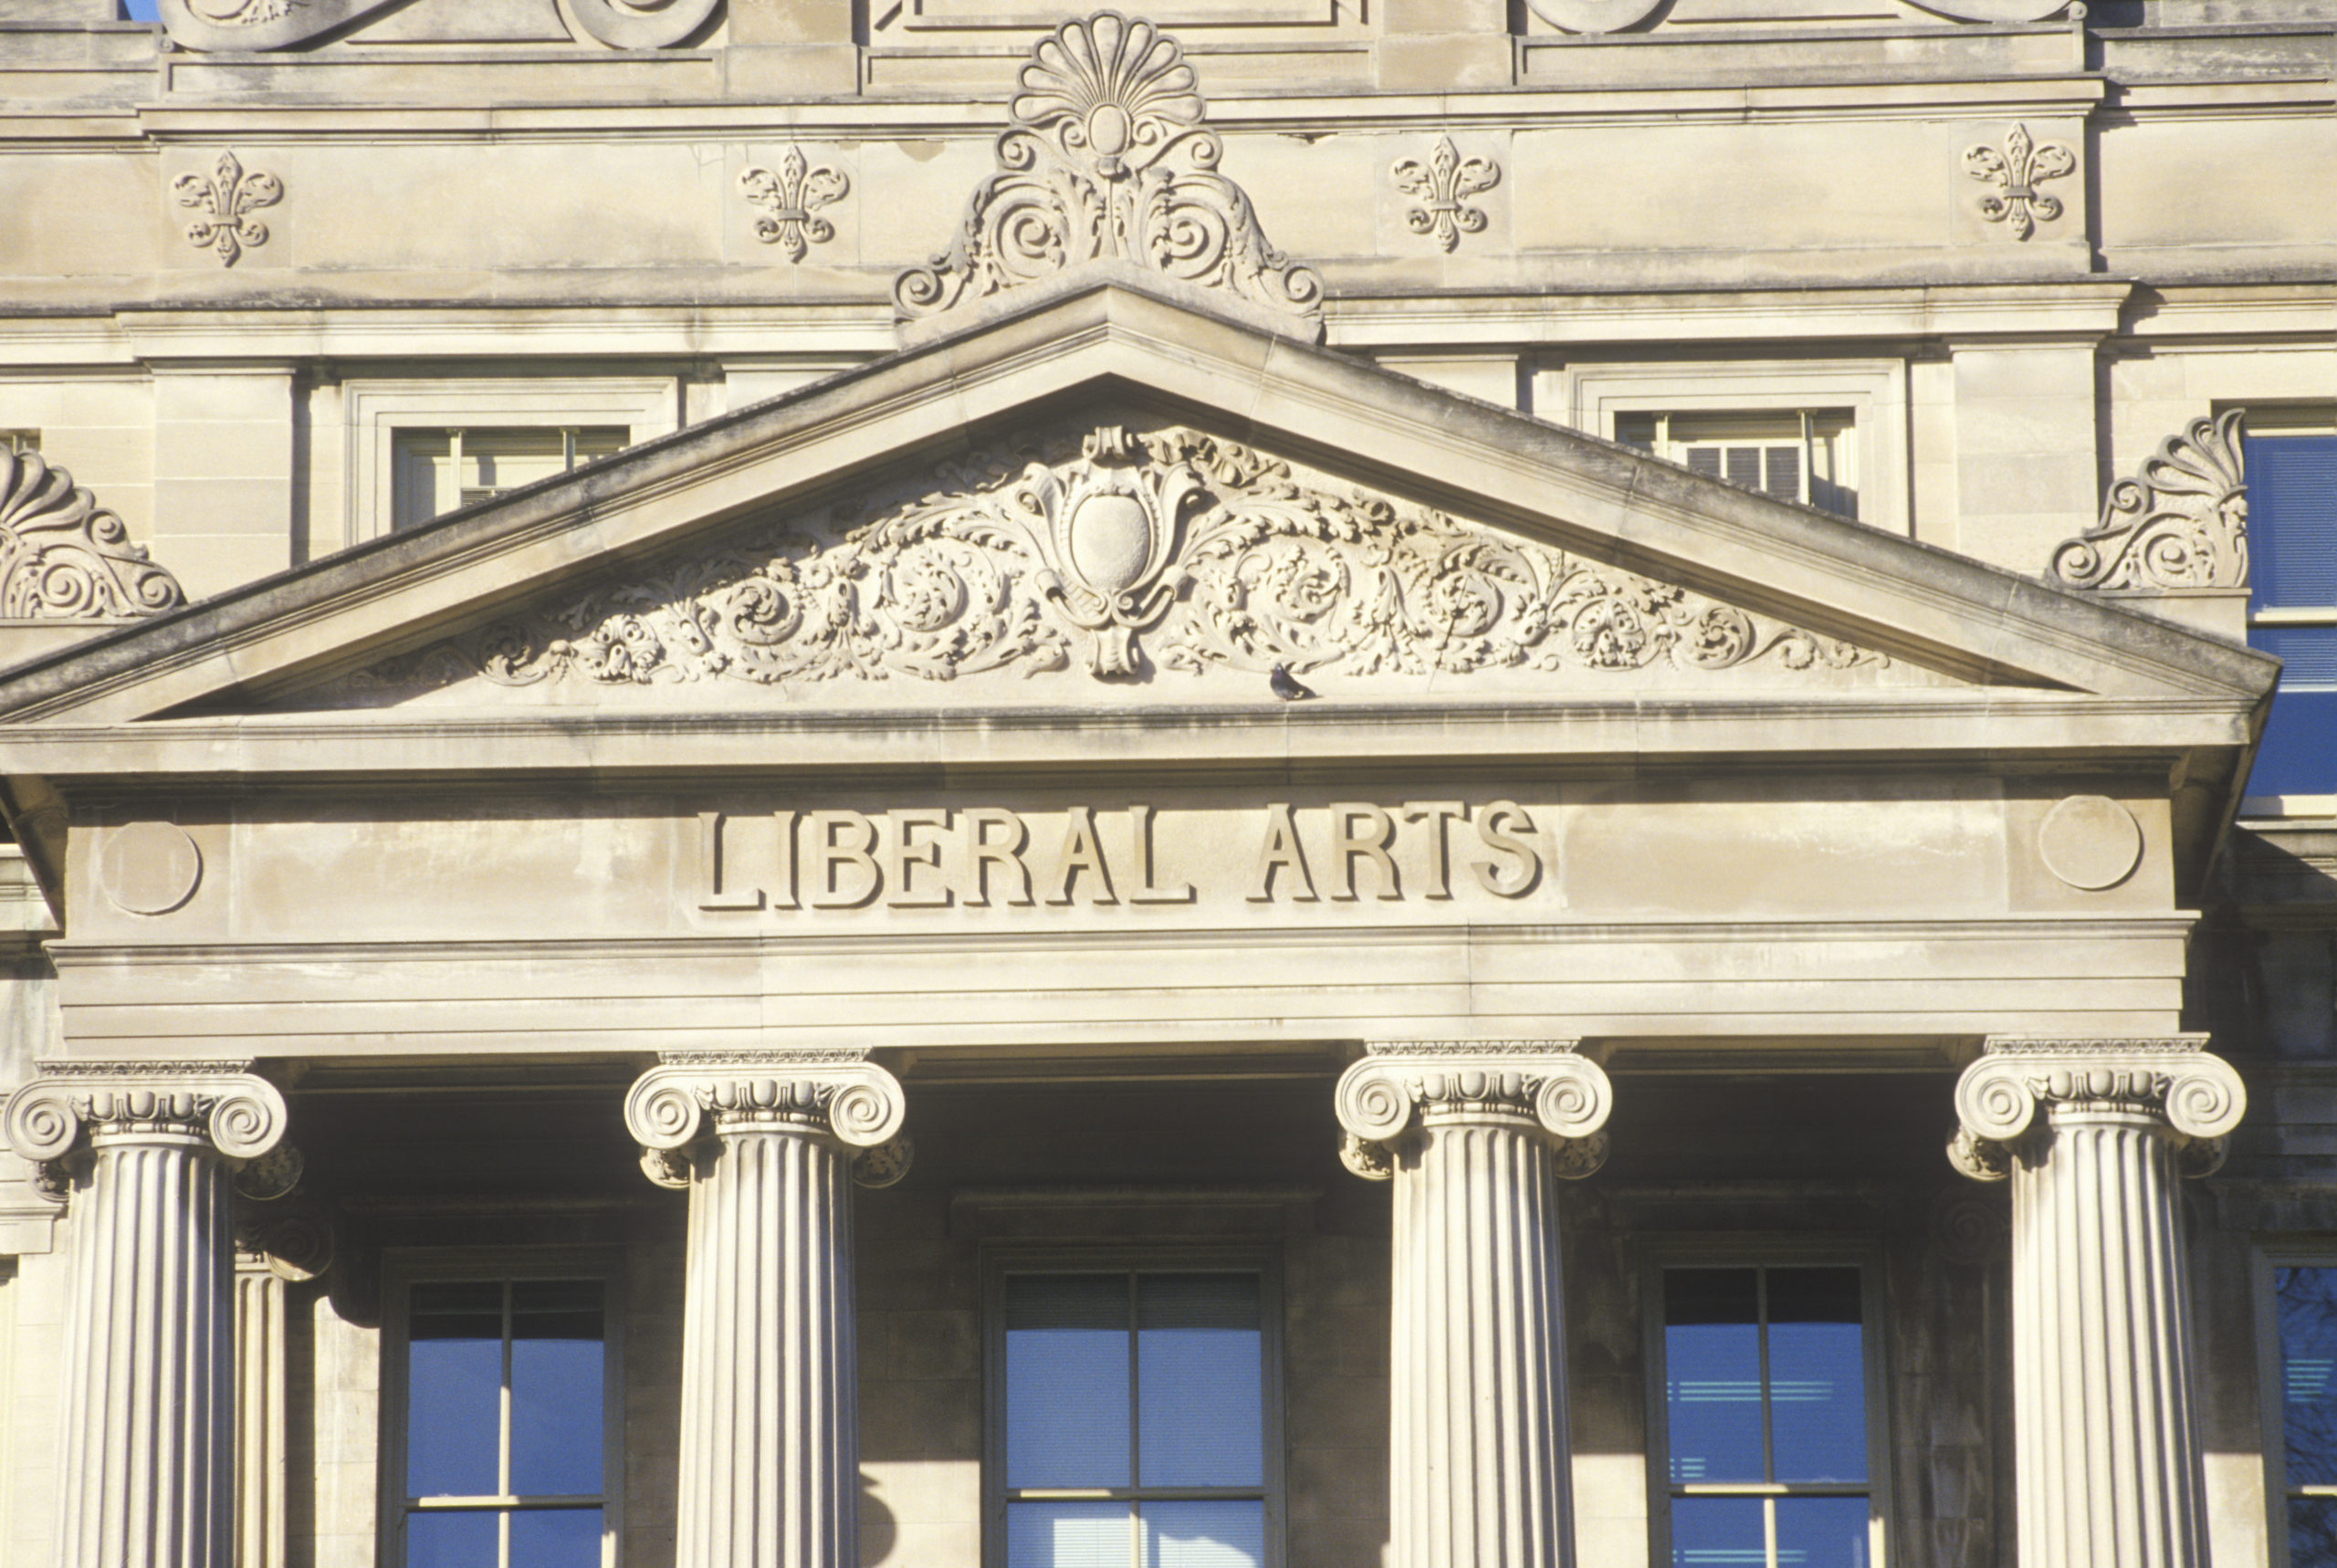 A picture of a building with a label that says "Liberal Arts"